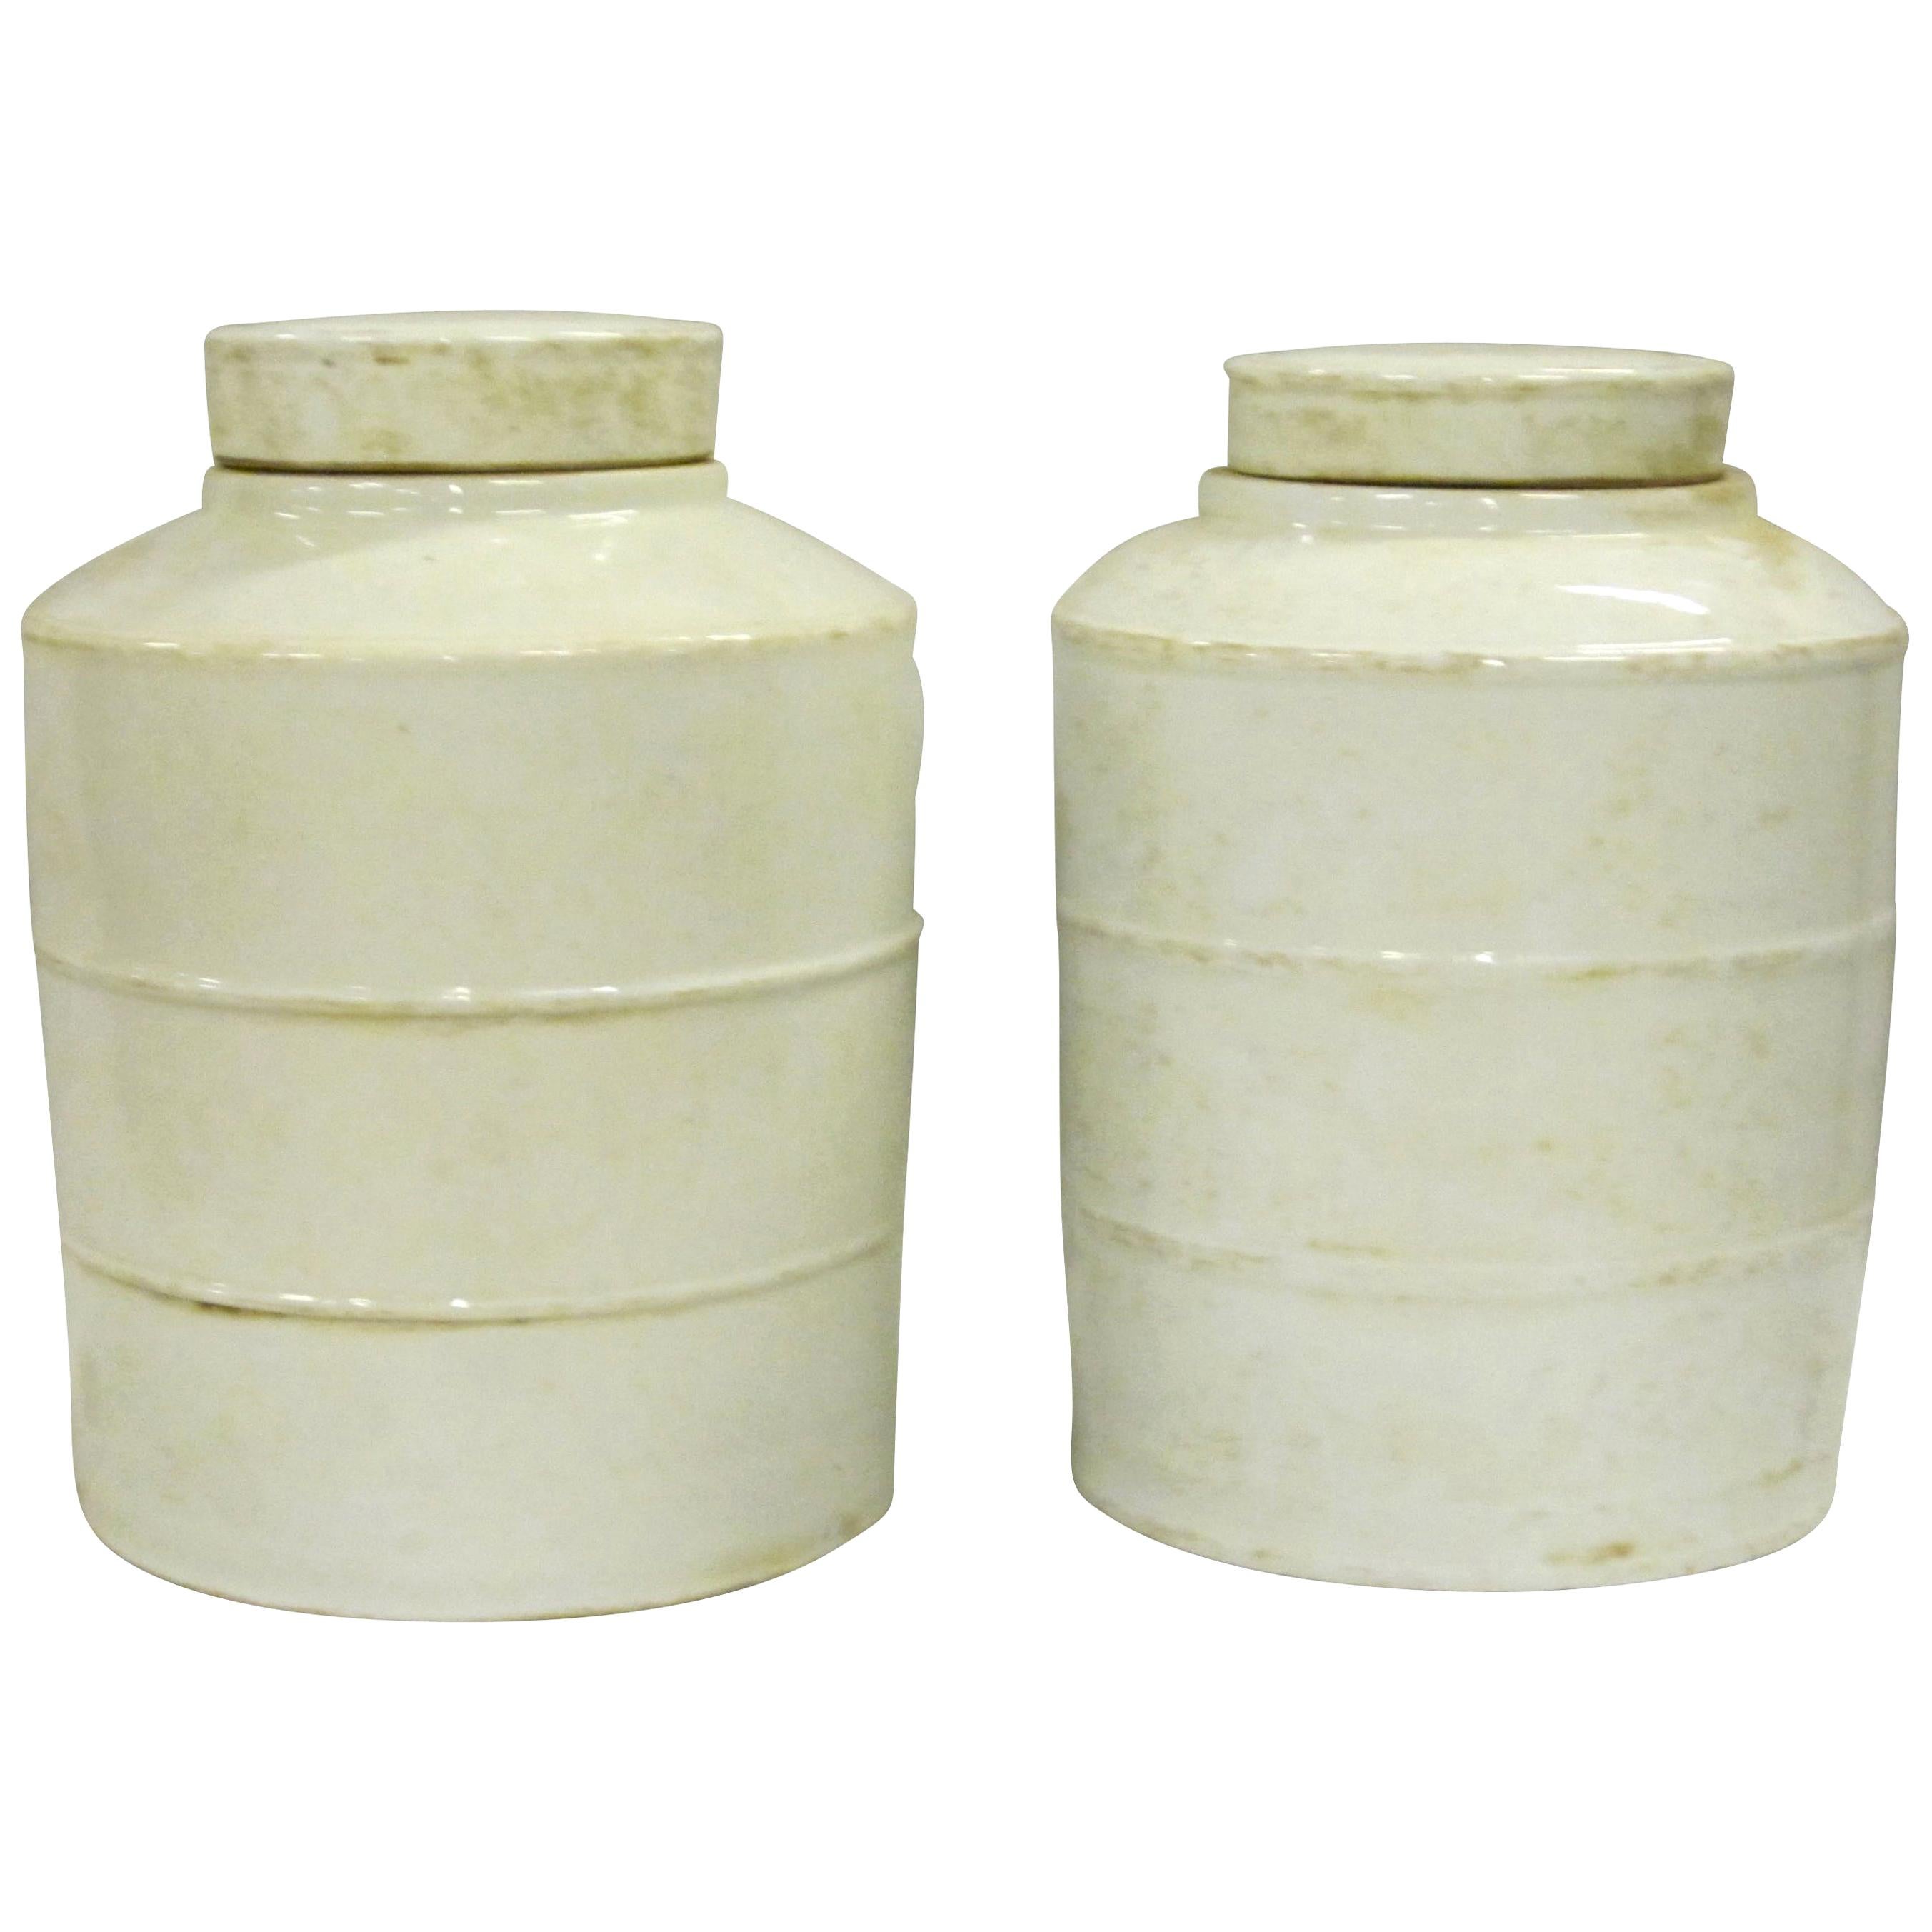 Pair of White Ribbed Round Jars with Lids, China, Contemporary